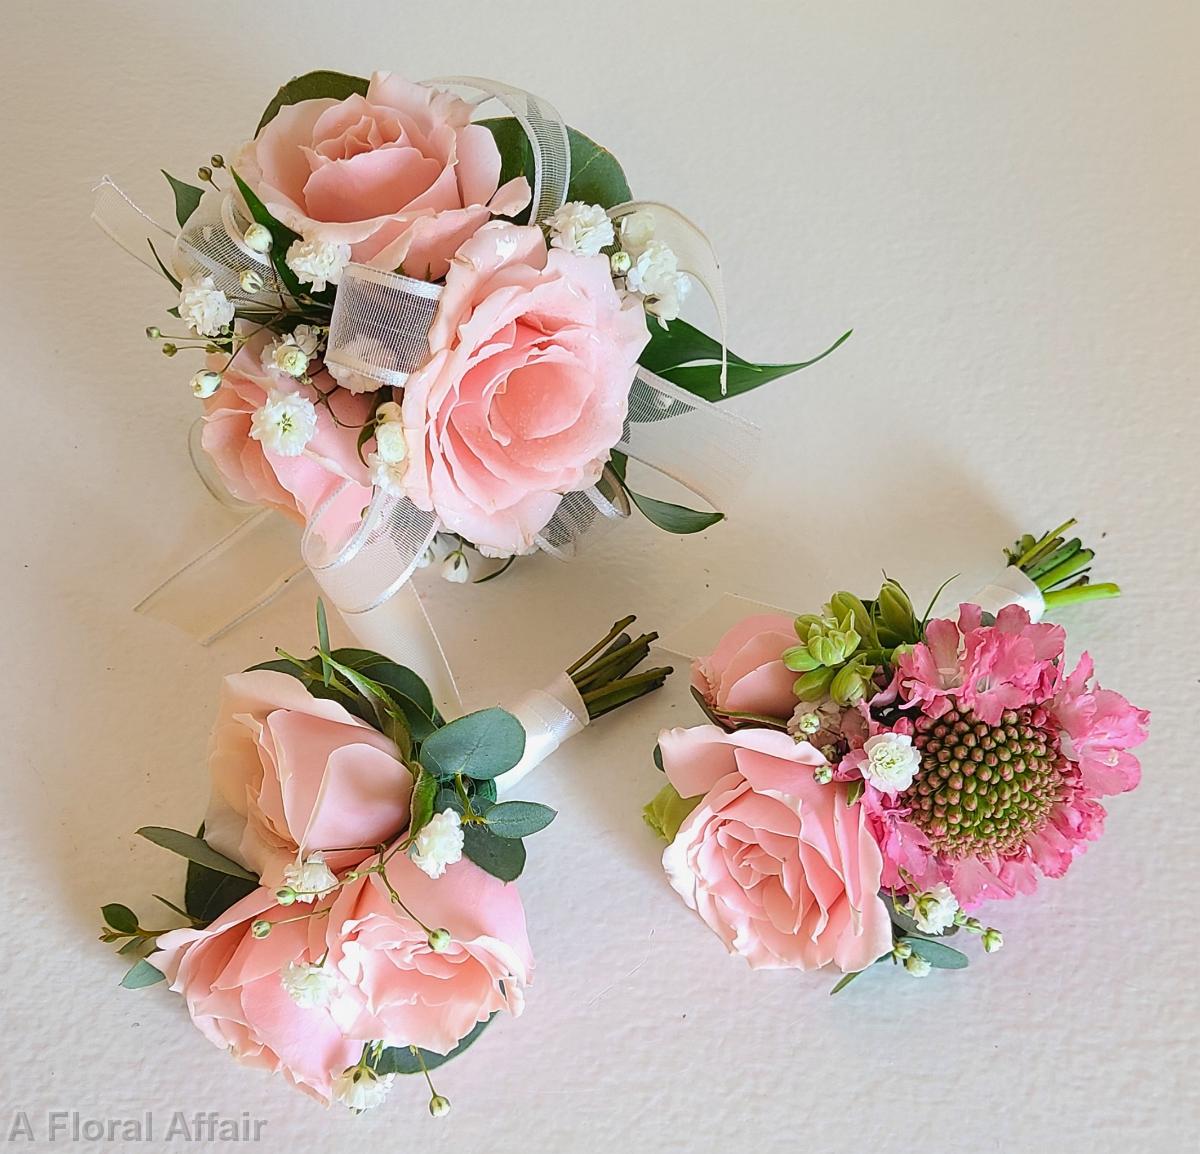 BF829 - Pink Scabiosa Boutonniere and Blush Corsage